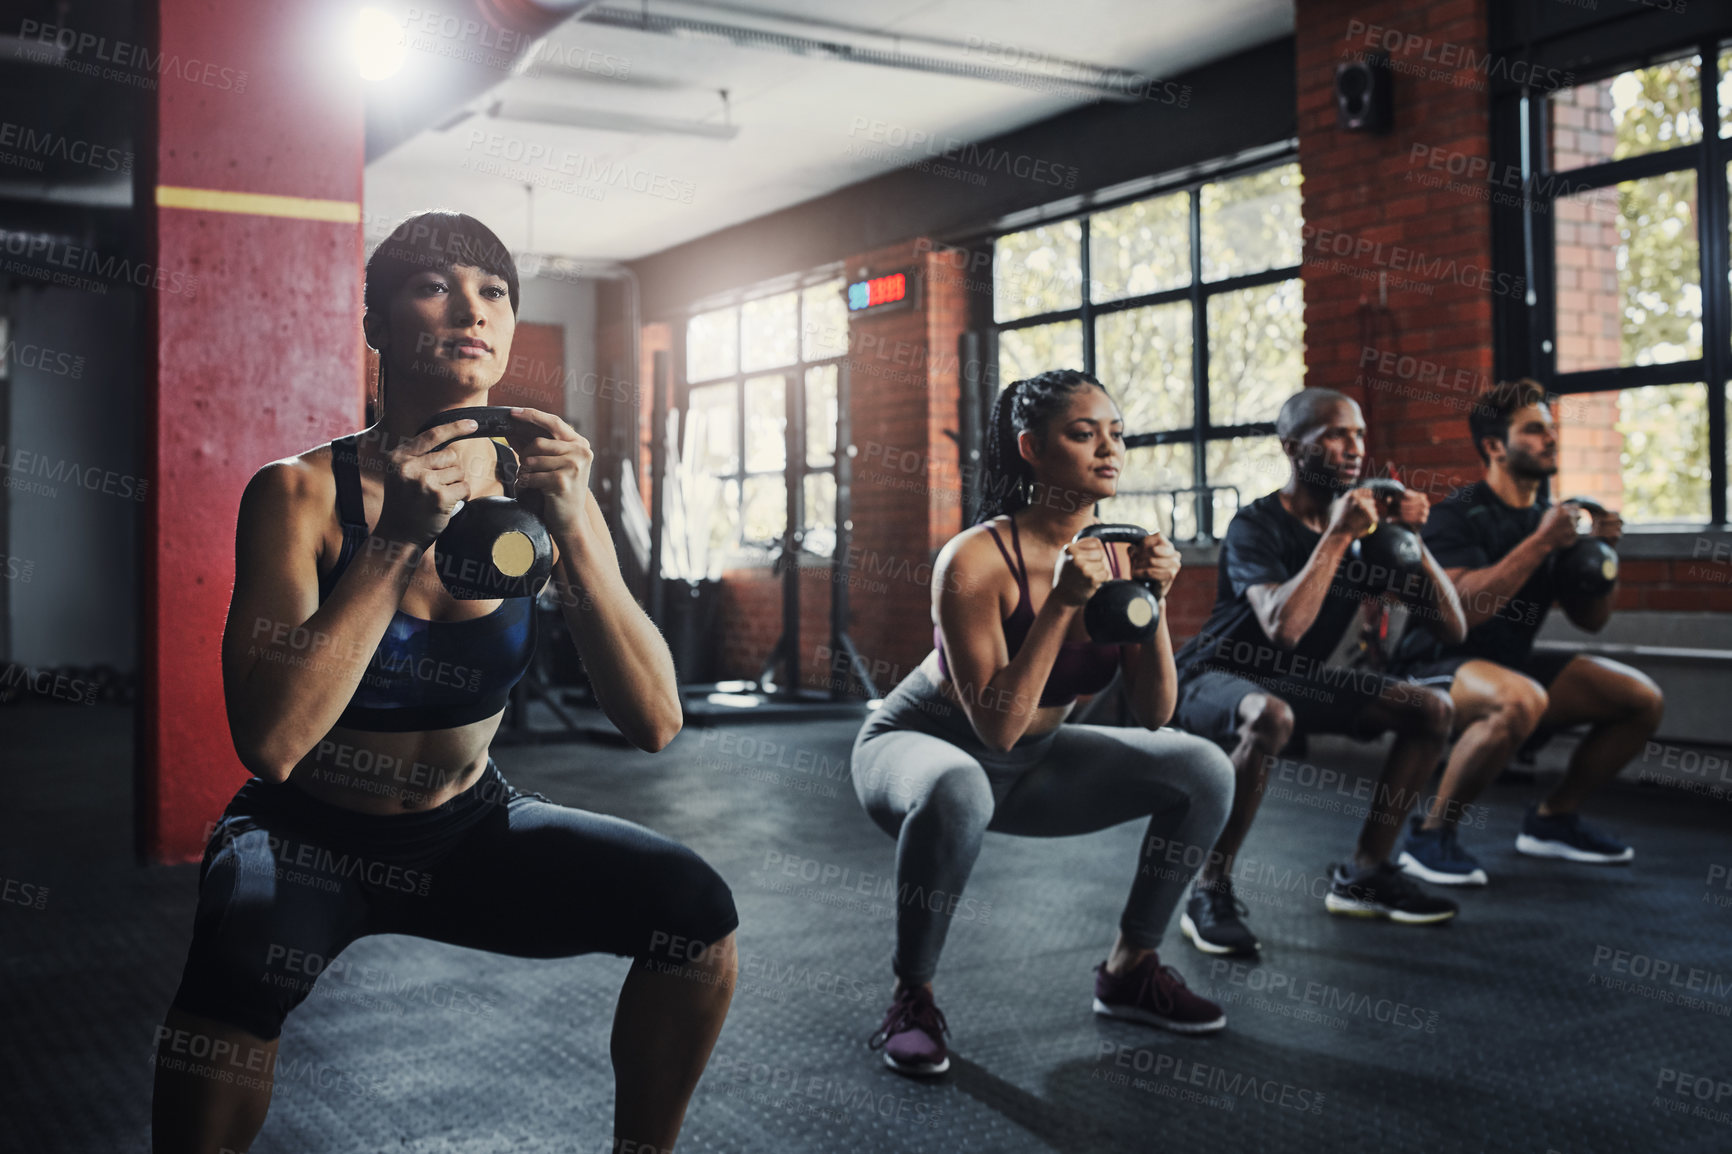 Buy stock photo Shot of a group of people working out together